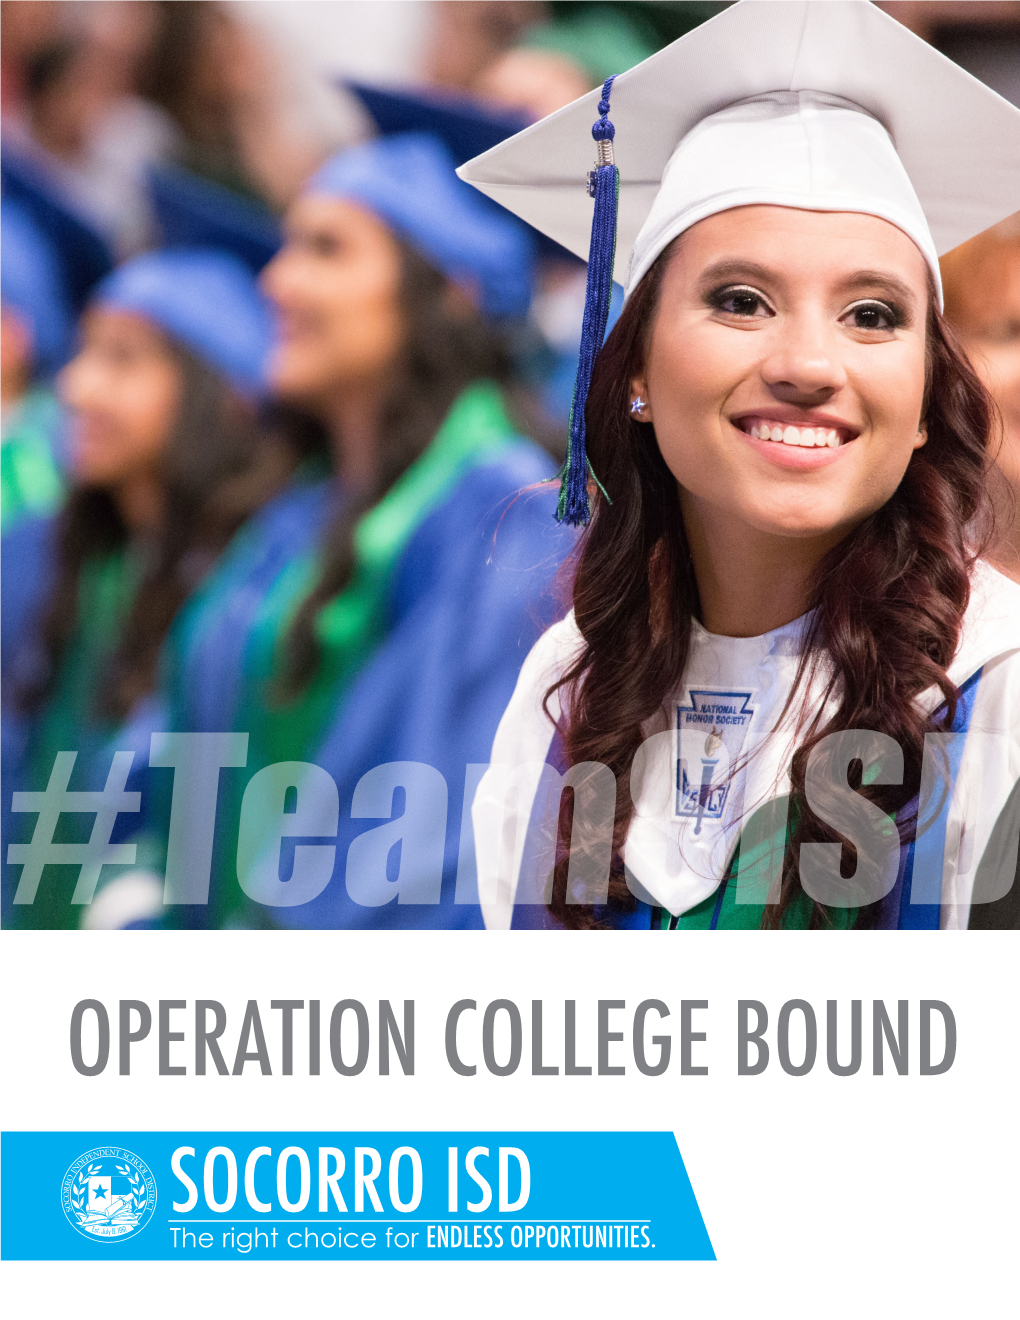 OPERATION COLLEGE BOUND SOCORRO ISD the Right Choice for ENDLESS OPPORTUNITIES